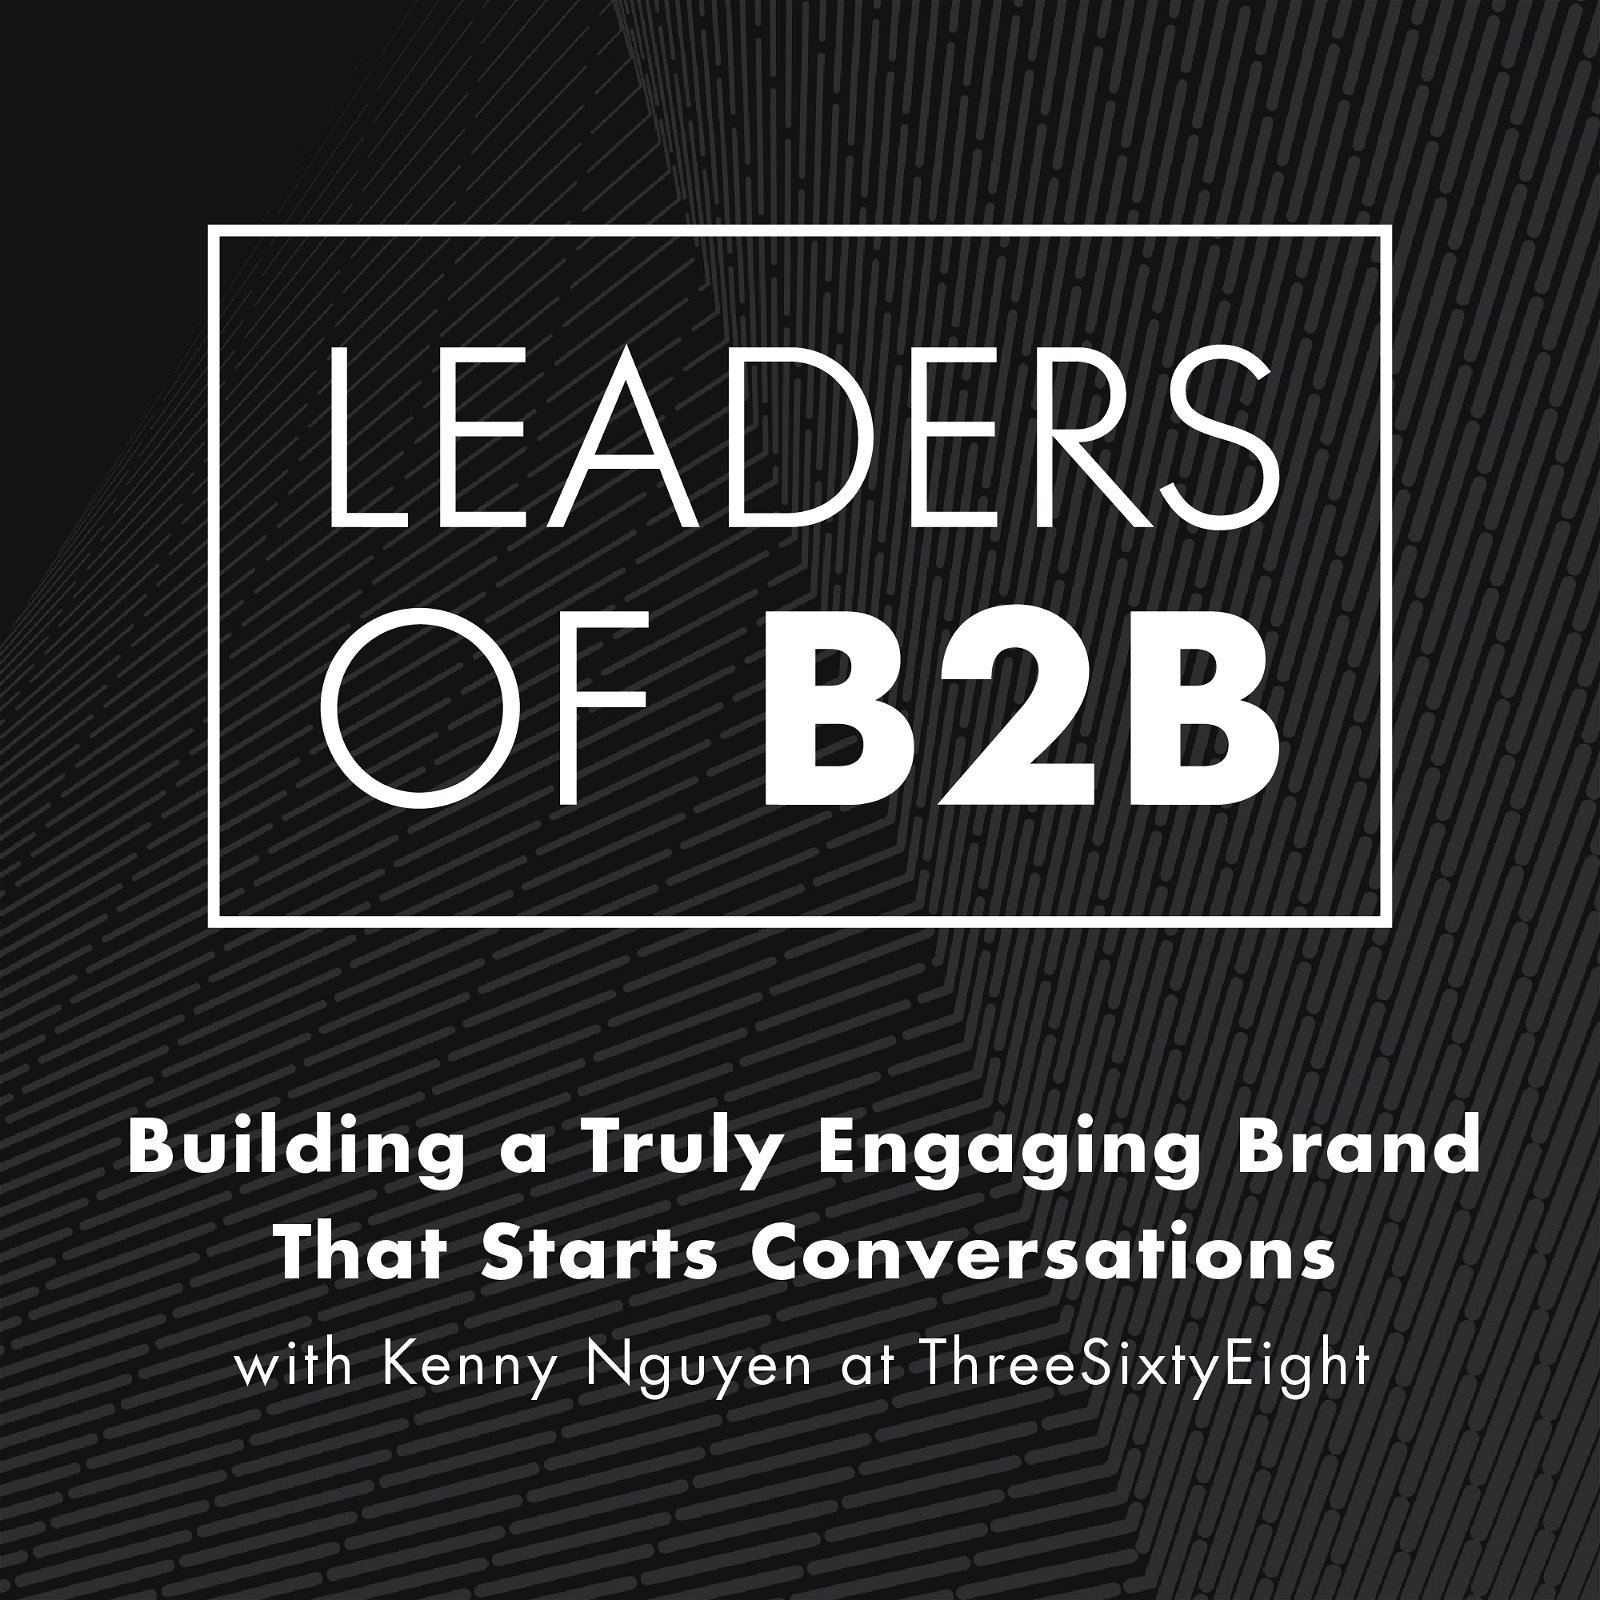 Building a Truly Engaging Brand That Starts Conversations with Kenny Nguyen at ThreeSixtyEight